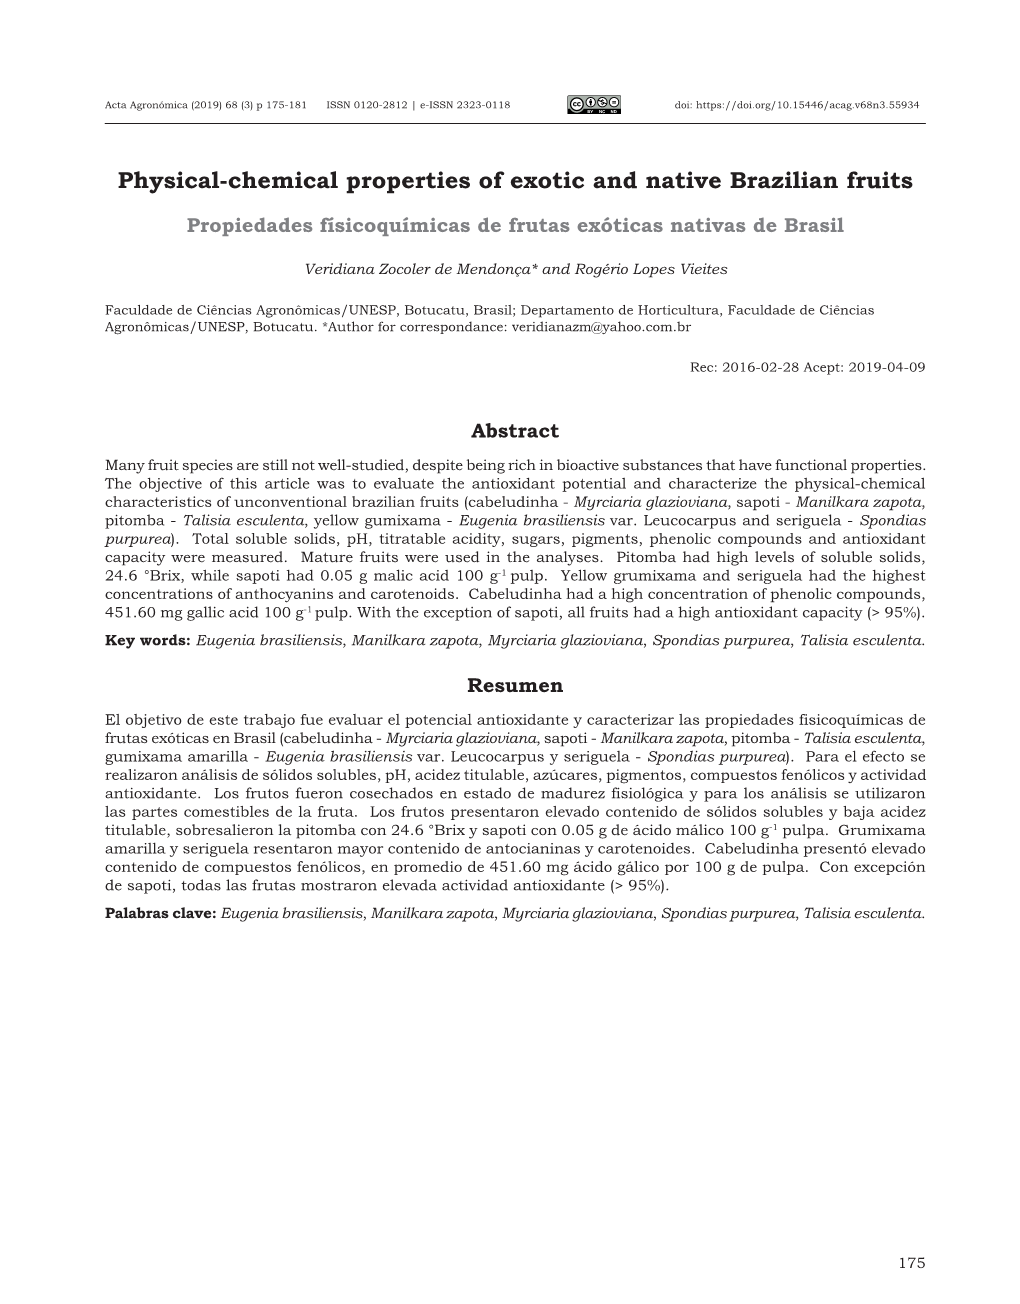 Physical-Chemical Properties of Exotic and Native Brazilian Fruits